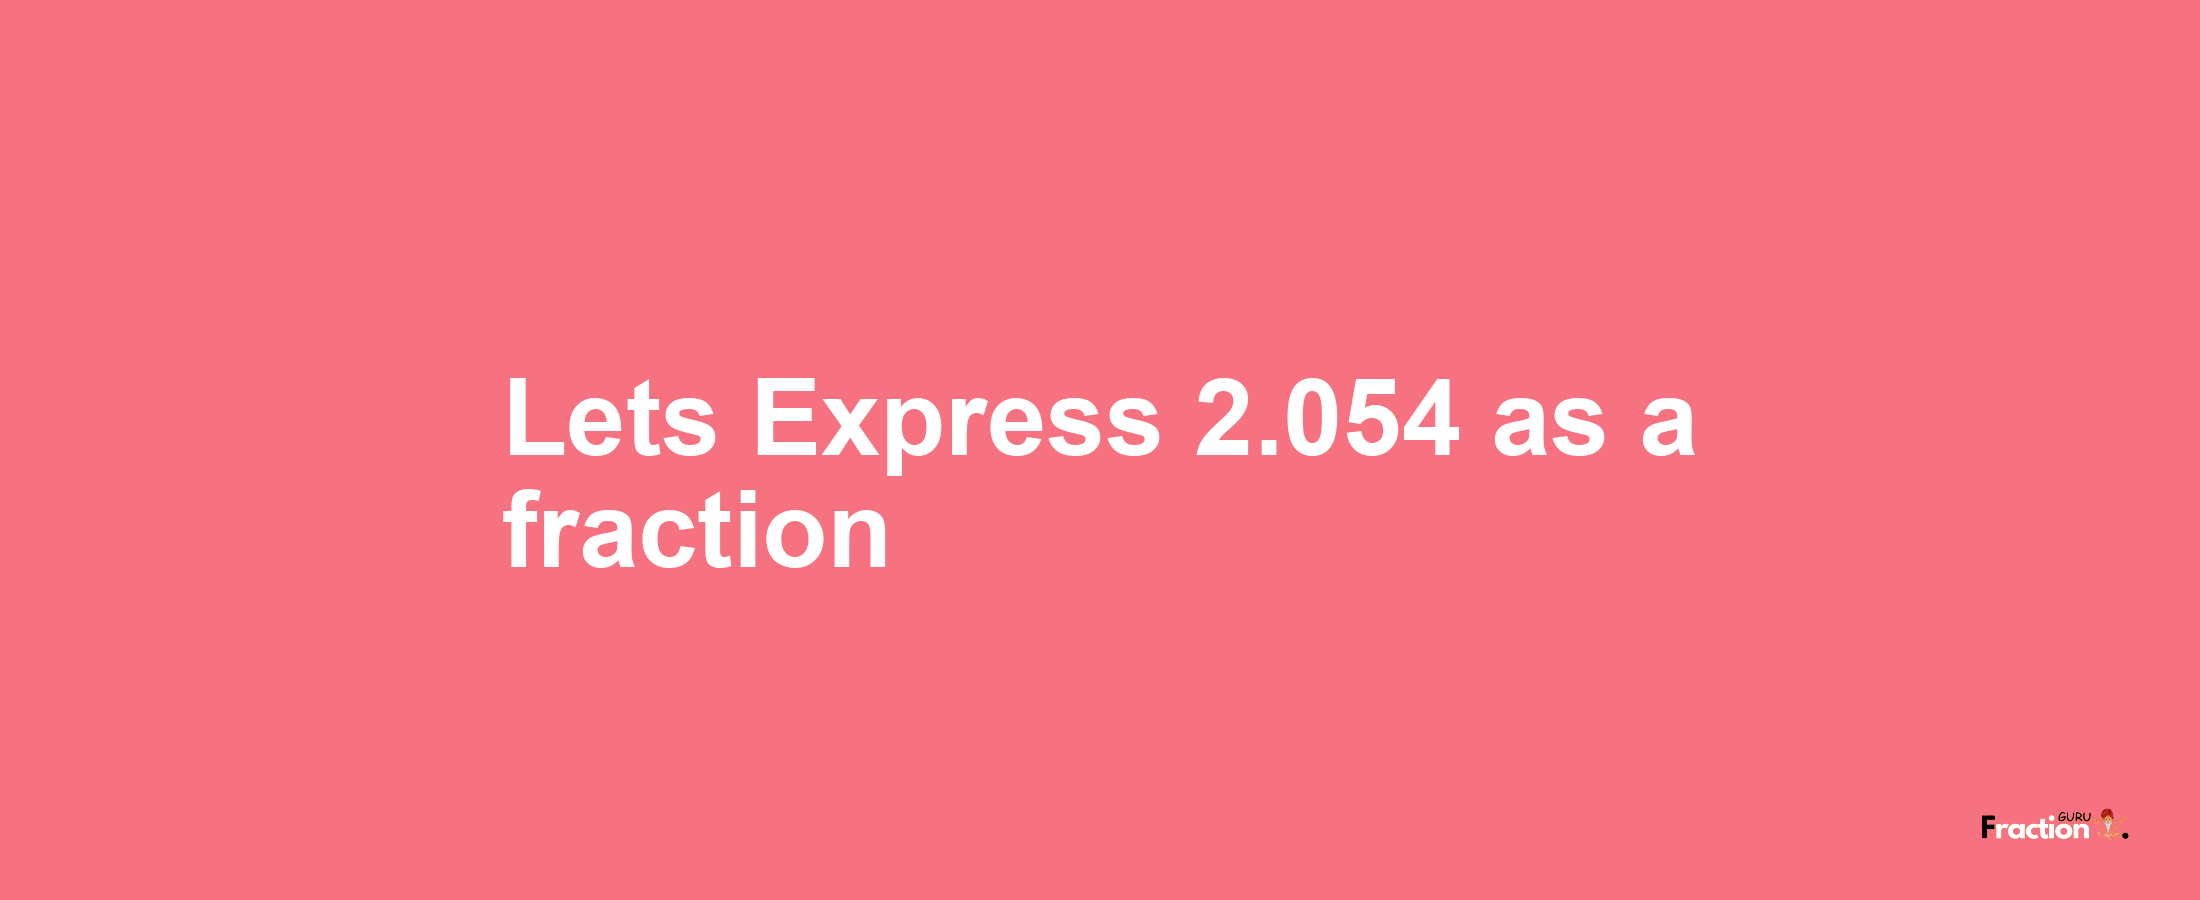 Lets Express 2.054 as afraction